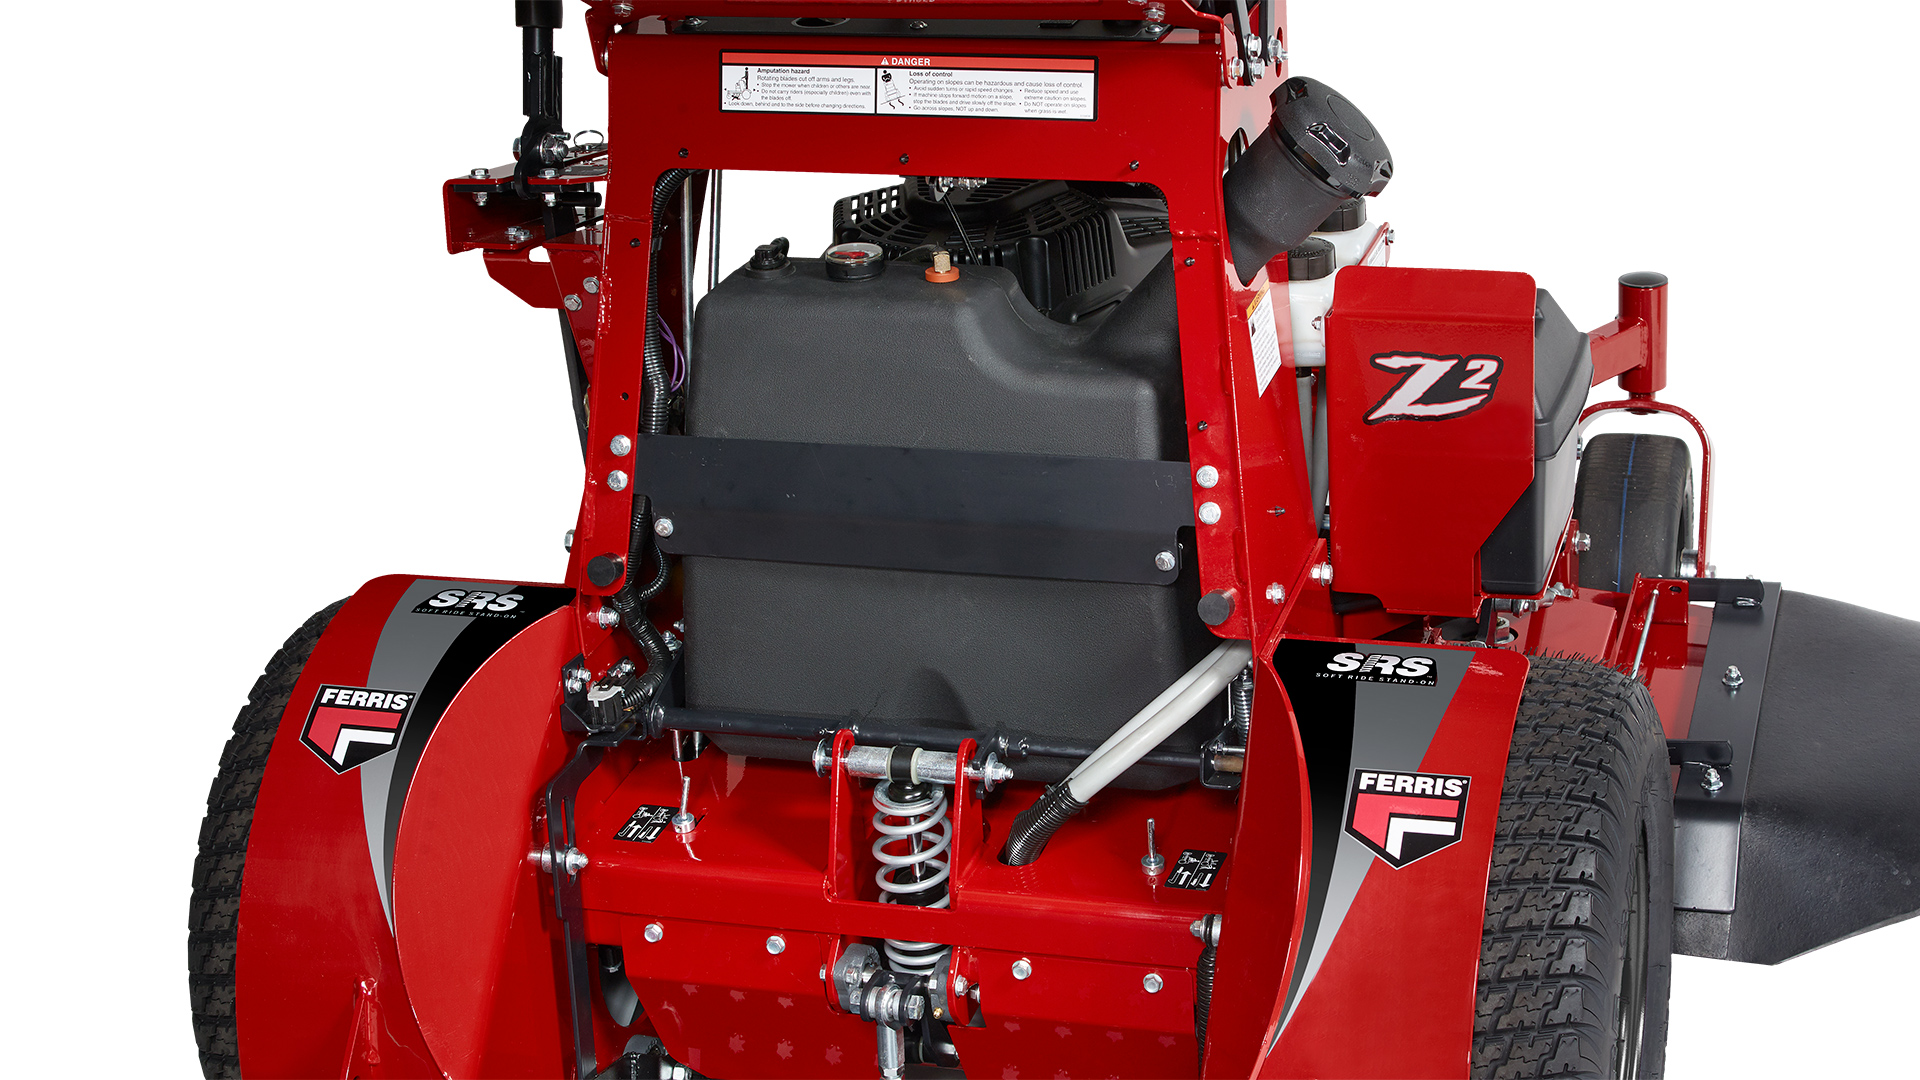 Ferris SRS™ Z2 Soft Ride Stand-On Mowers - Fuel Capacity